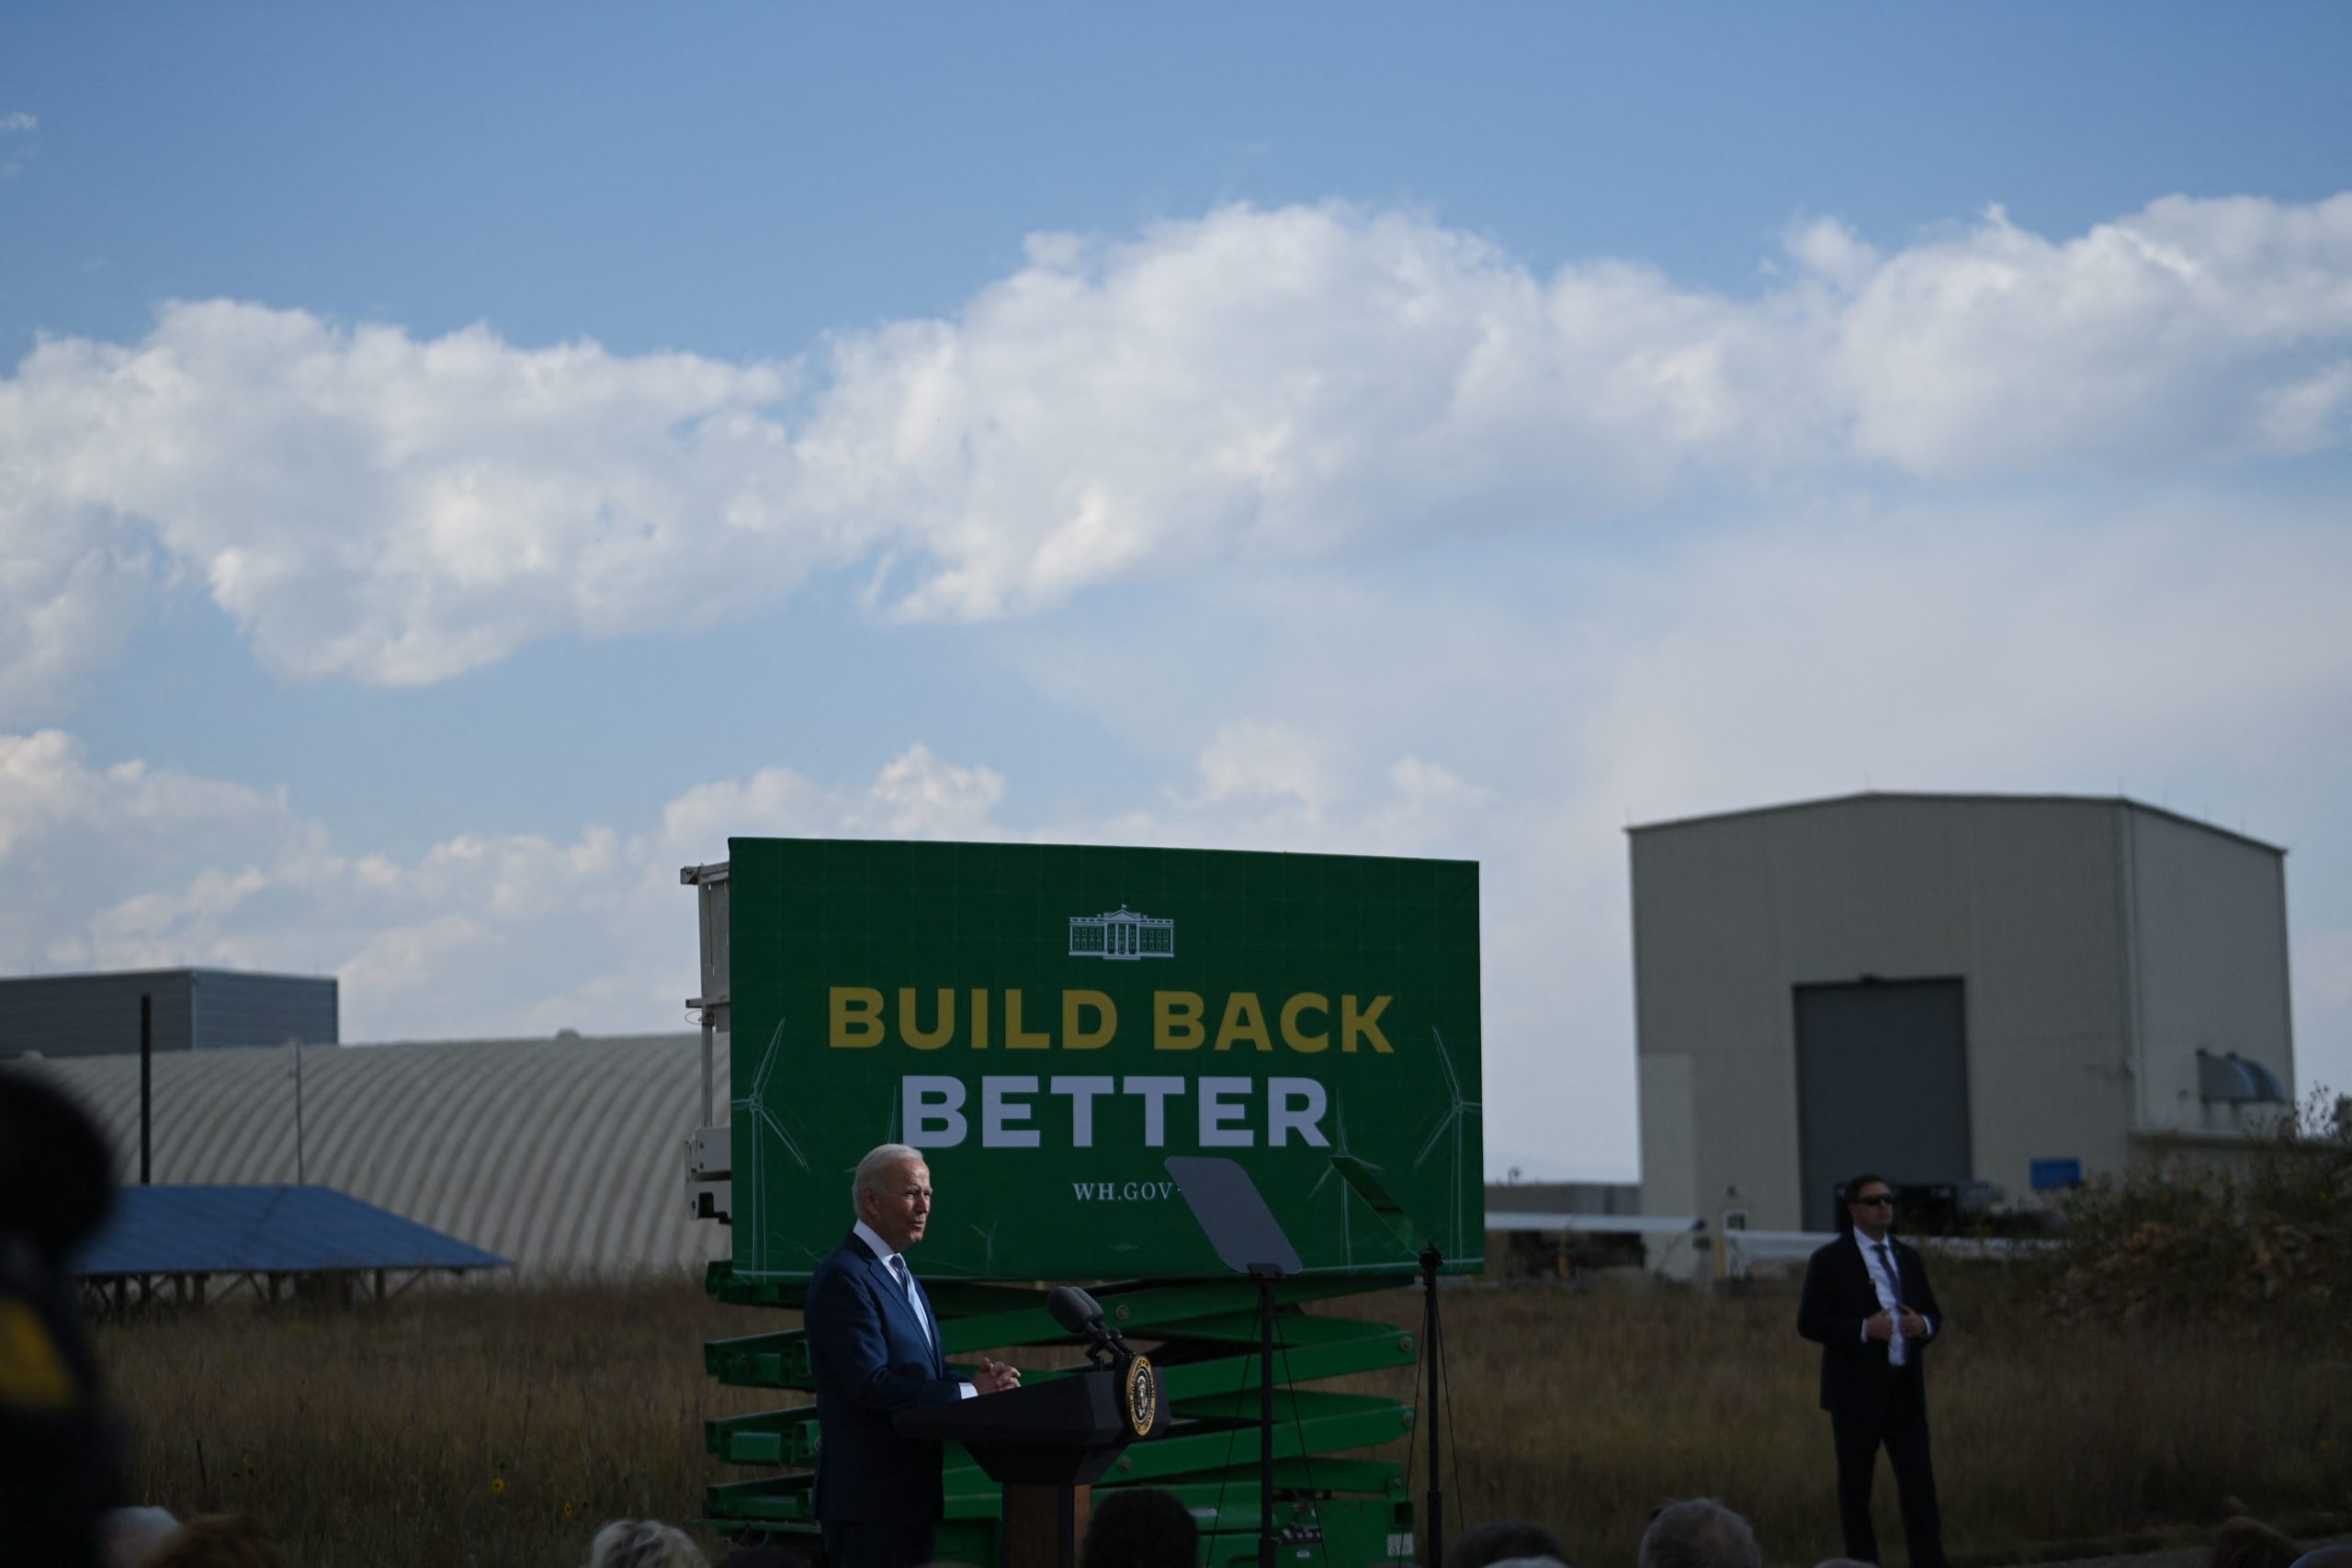 US President Joe Biden speaks at the National Renewable Energy Laboratory in Arvada, Colorado, on September 14, 2021, on the infrastructure deal and the Build Back Better agenda. (Photo by Brendan SMIALOWSKI / AFP) (Photo by BRENDAN SMIALOWSKI/AFP via Getty Images)